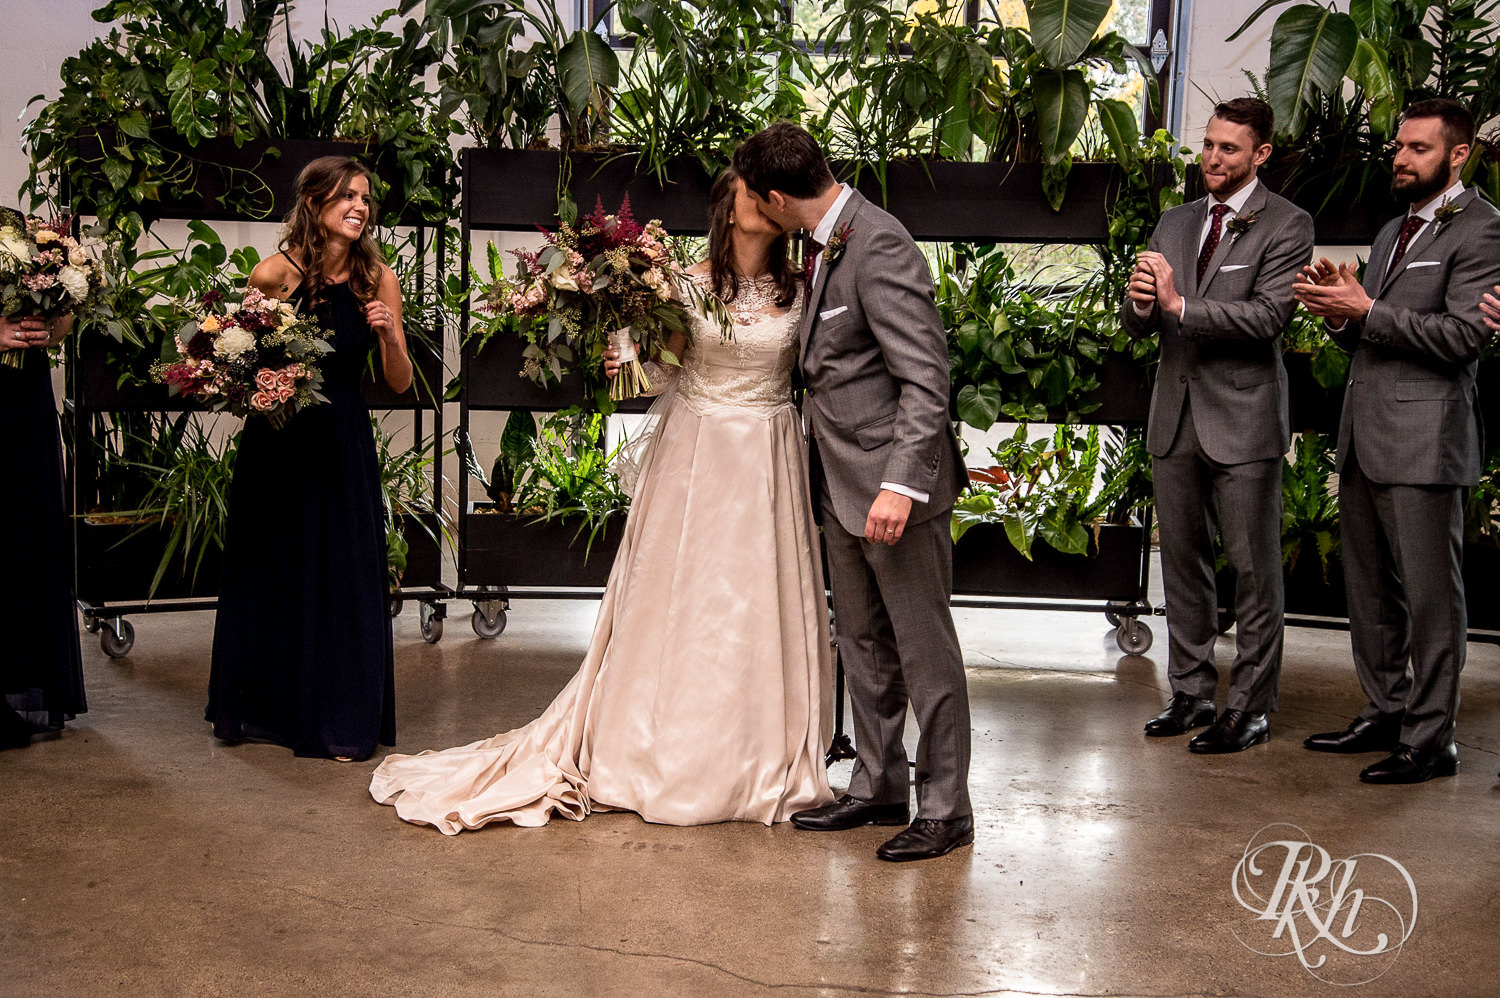 Bride and and groom kiss during wedding ceremony at Paikka in Saint Paul, Minnesota.